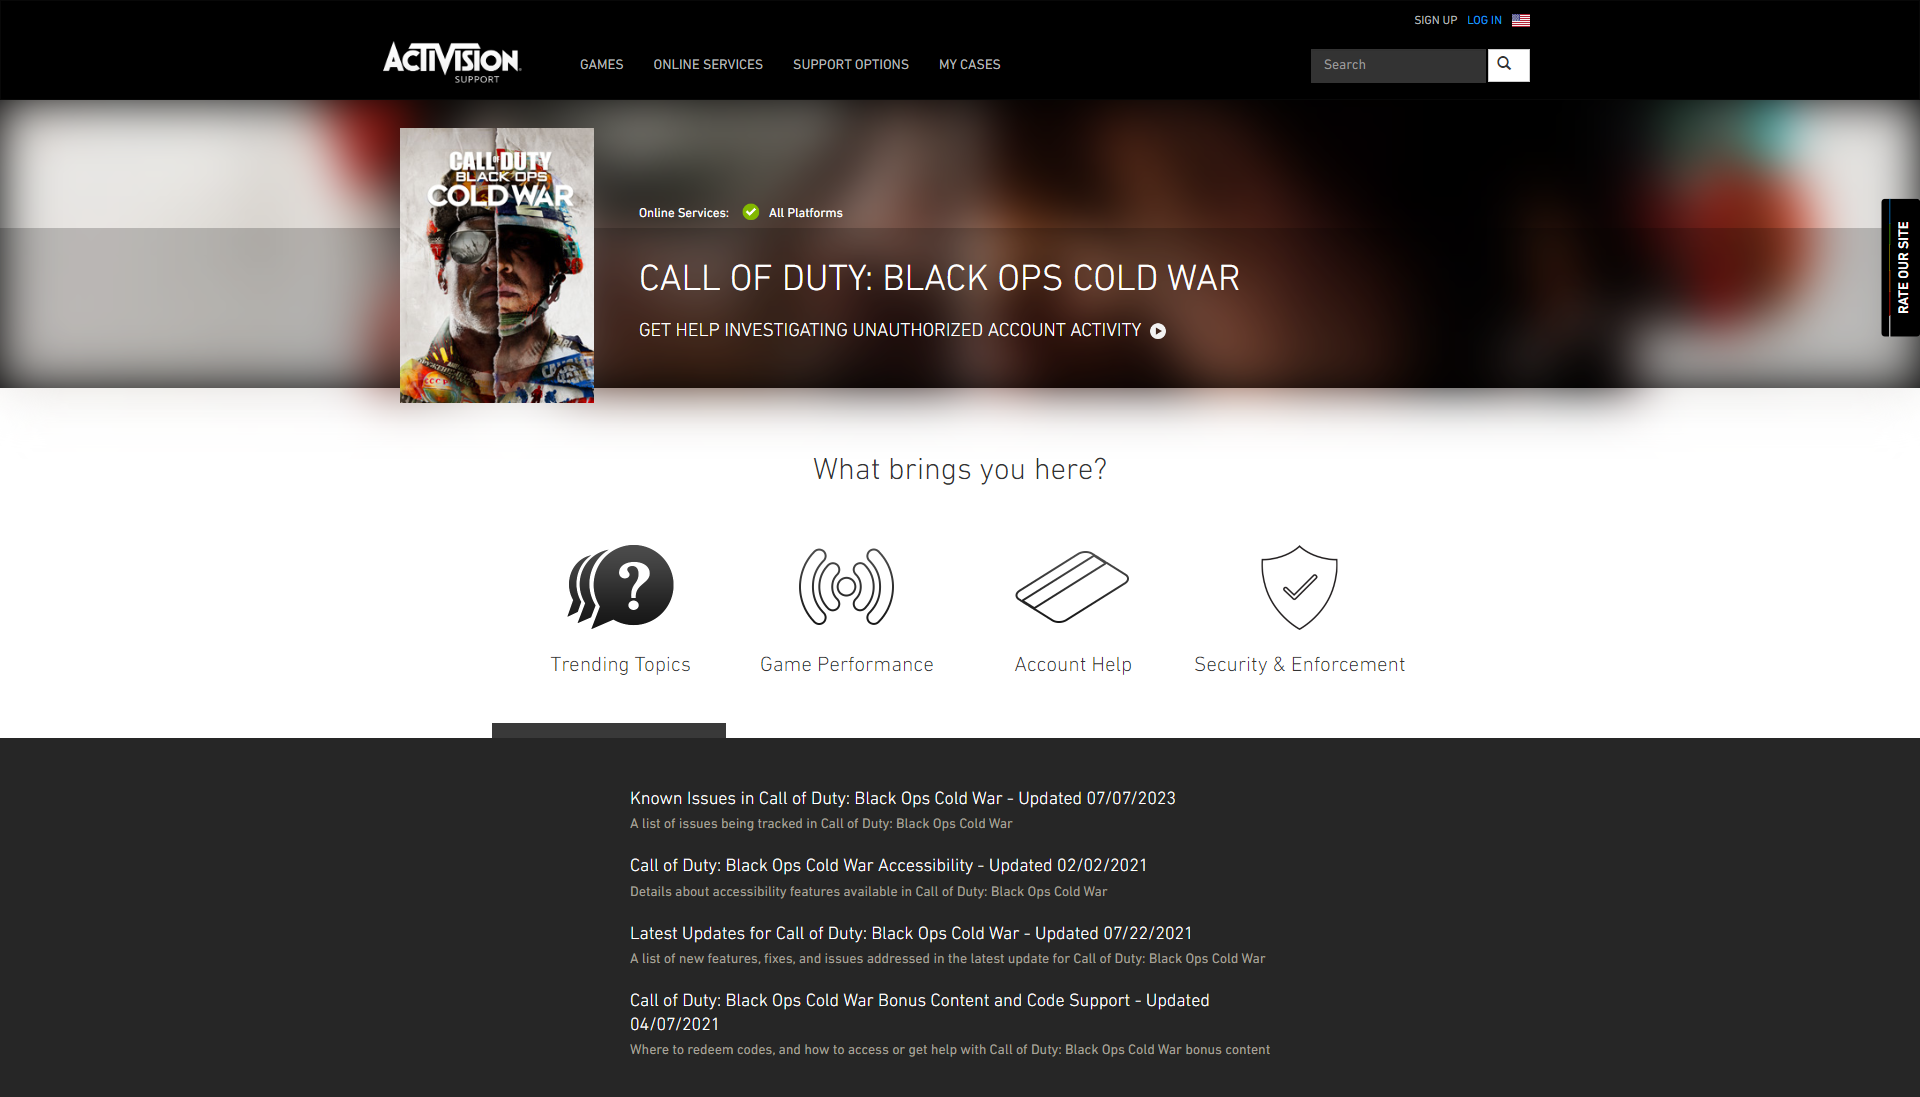 Contact Activision Support